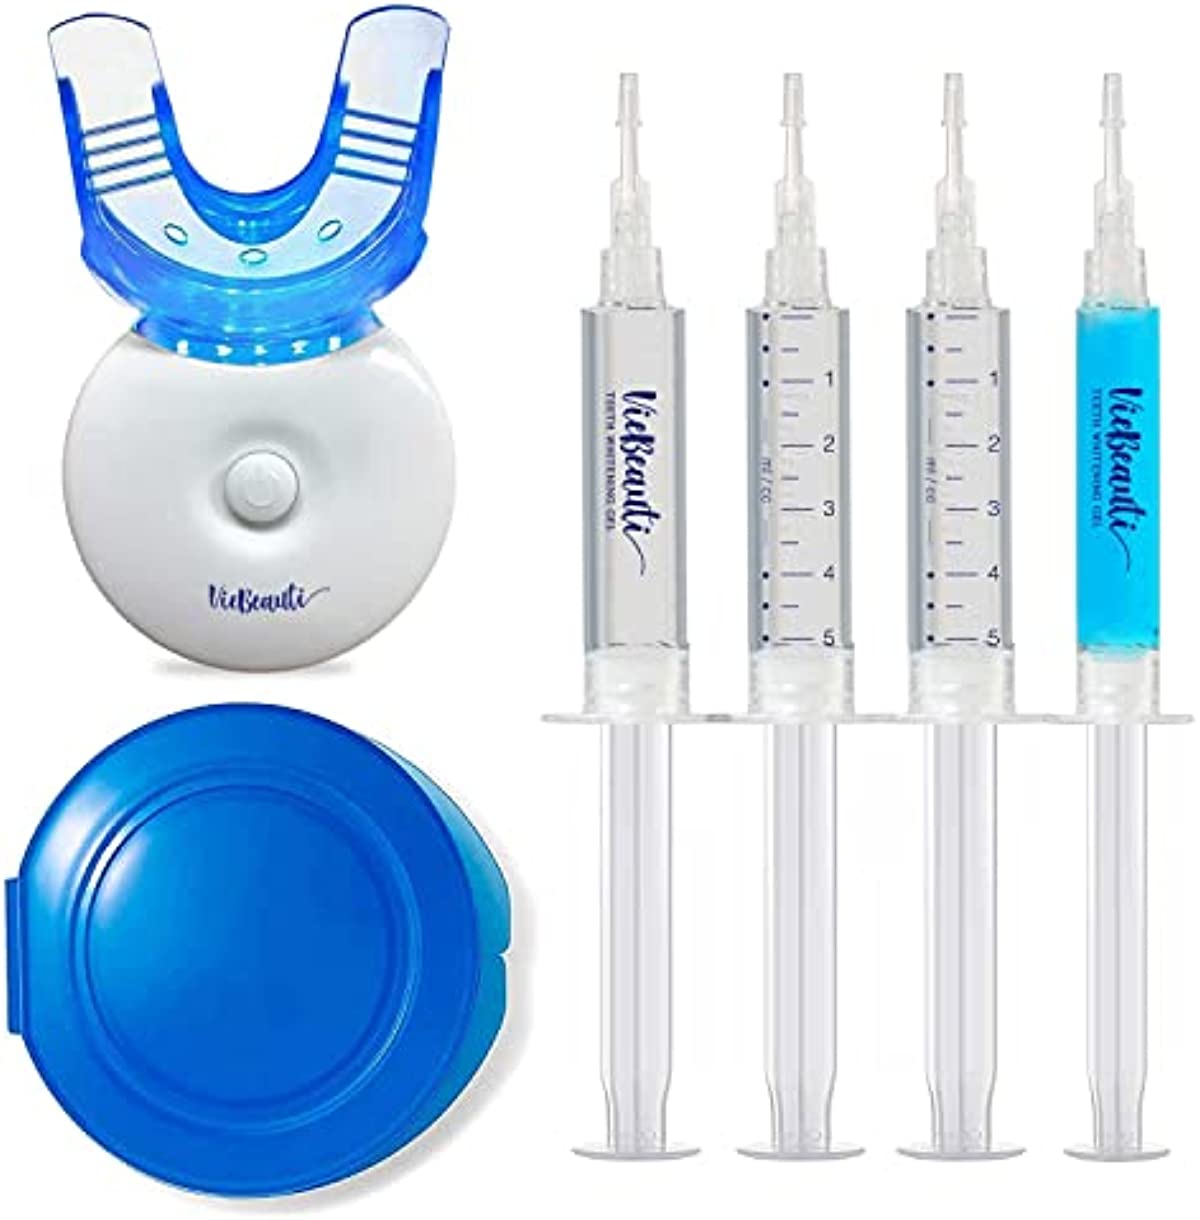 VieBeauti Teeth Whitening Kit - 5X LED Light Tooth Whitener with 35{356d8c95d9145be05b32413281b3afe046a061fa61c50b8f43ff9d9d3fad4fb4} Carbamide Peroxide, Mouth Trays, Remineralizing Gel and Tray Case - Built-In 10 Minute Timer Restores Your Gleaming White Smile